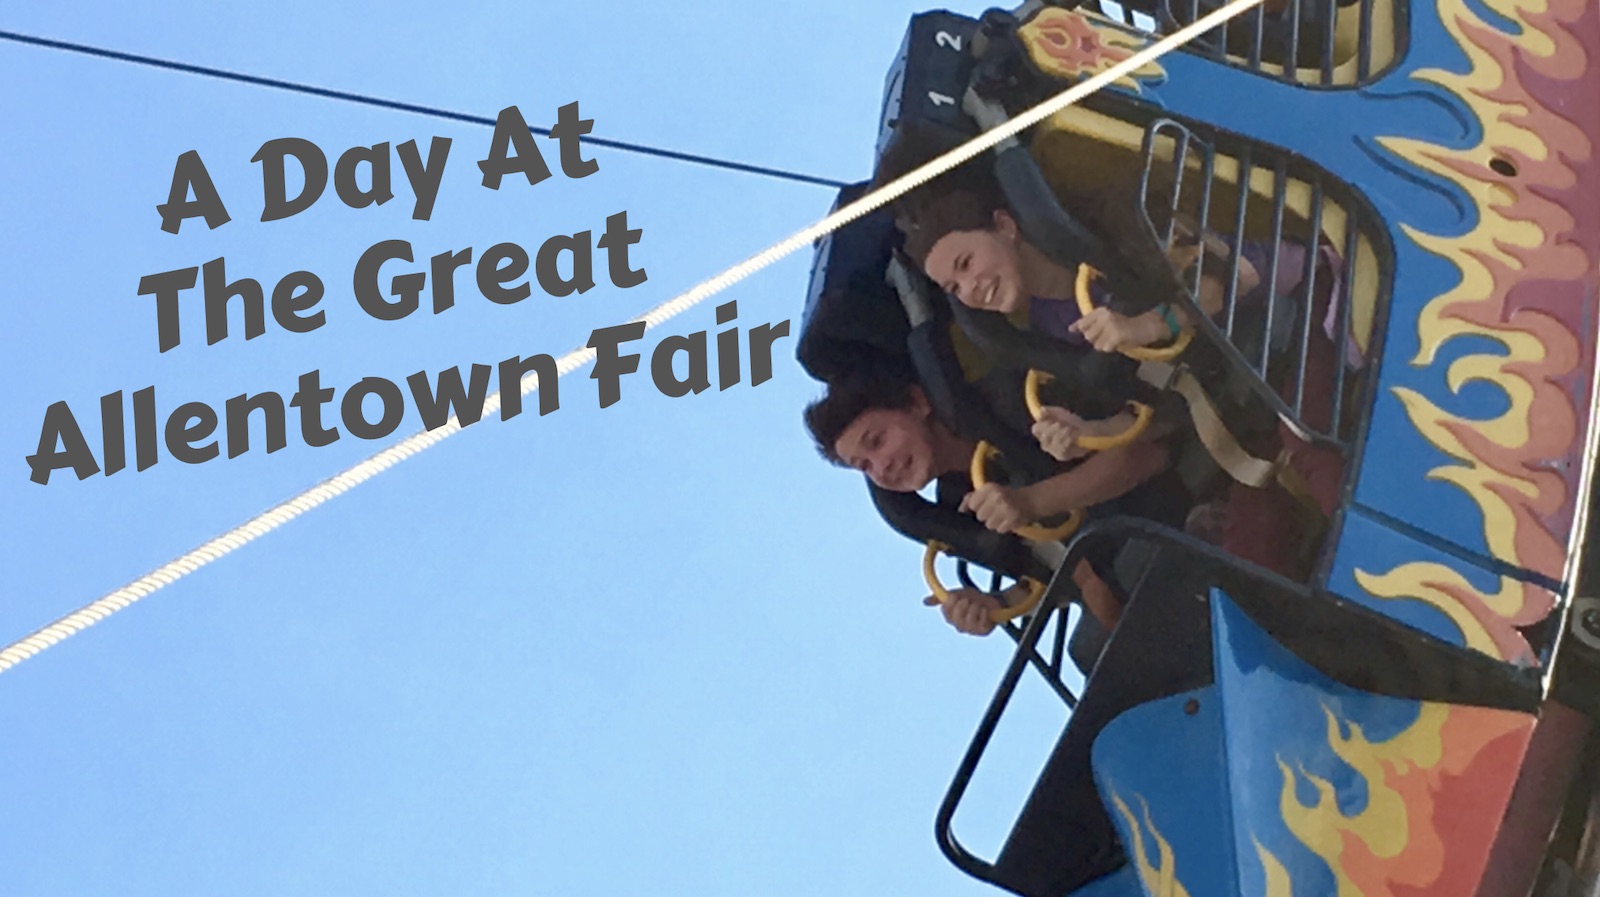 A Day at the Great Allentown Fair